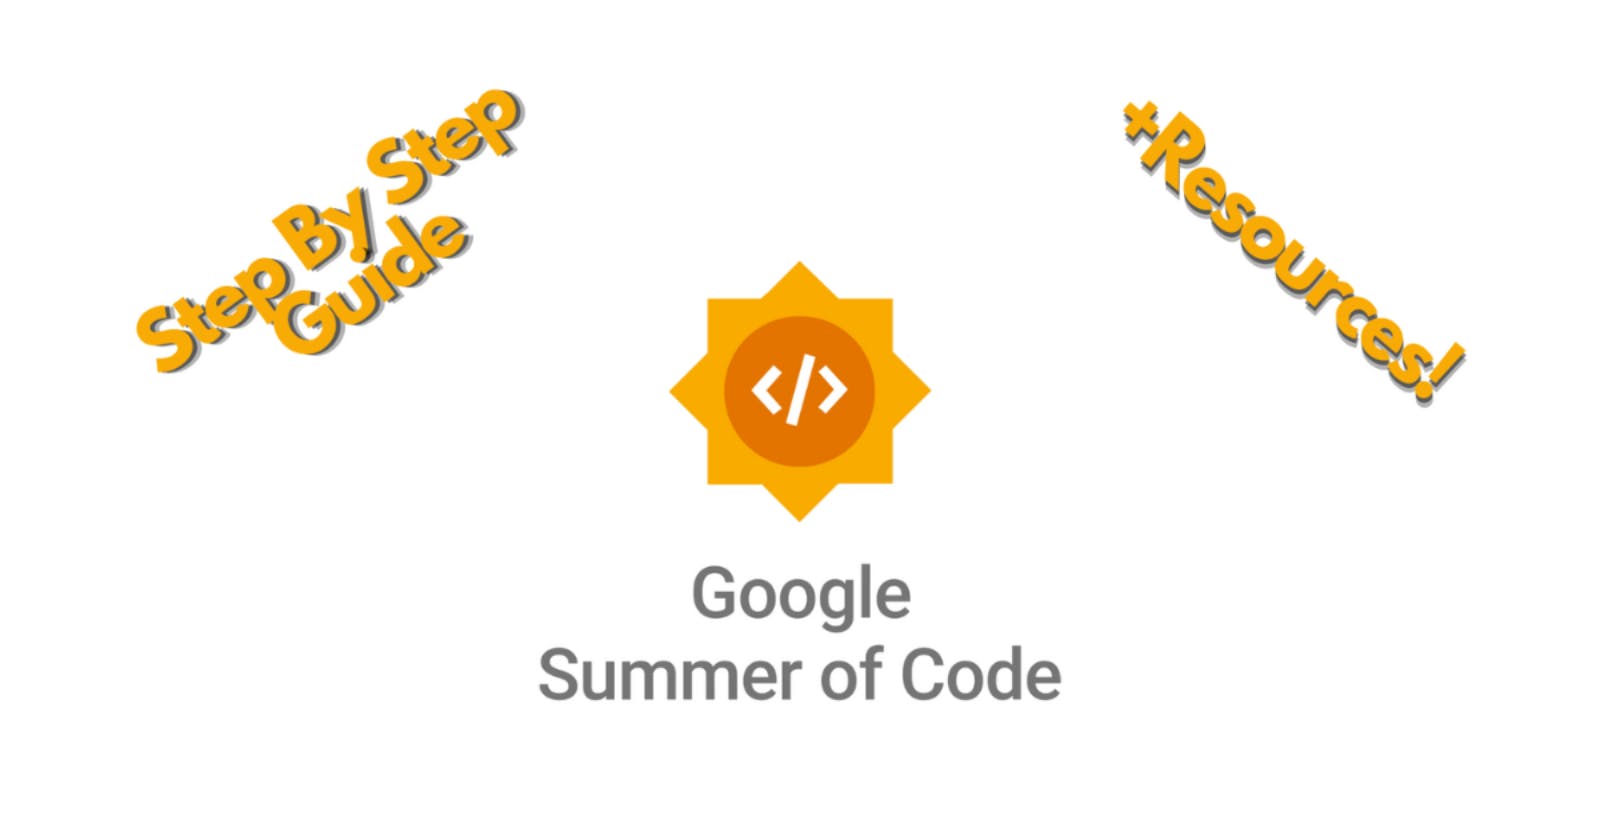 Google Summer of Code 101: A Practical Guide with Resources!